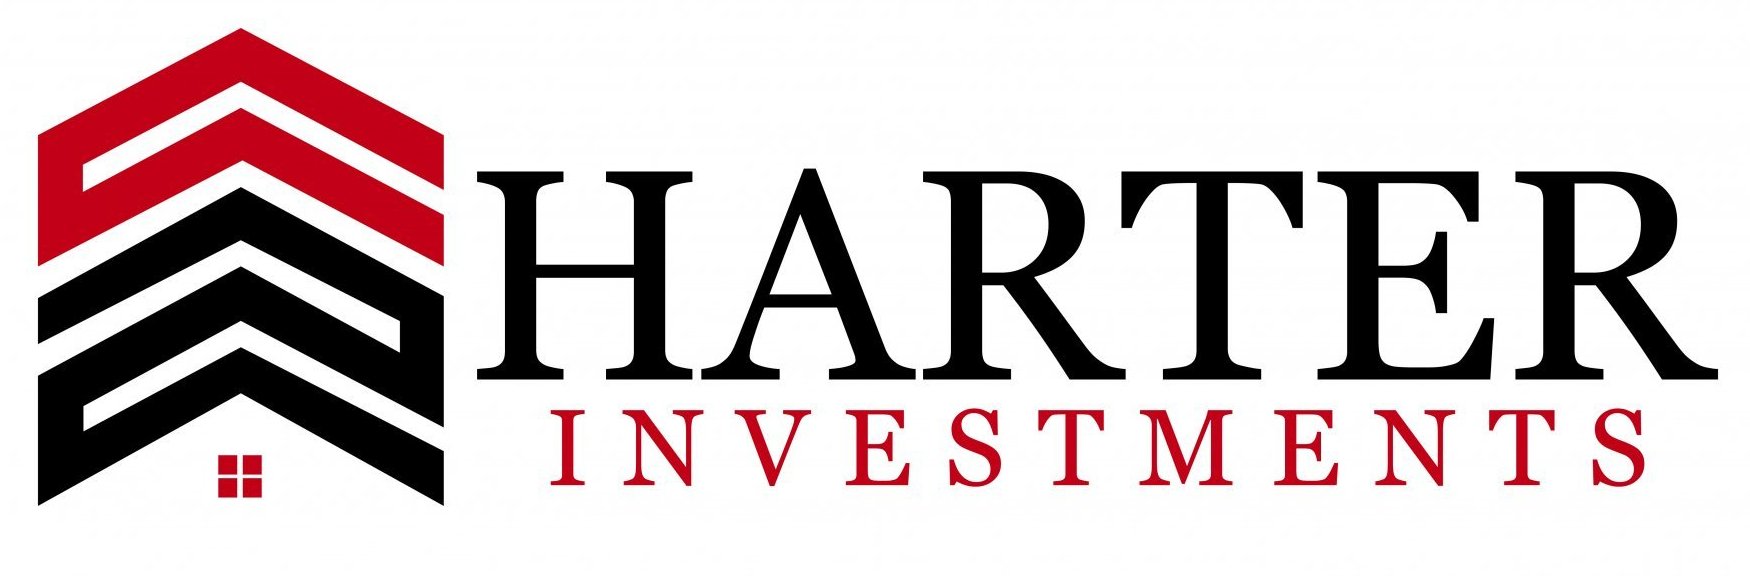 Harter Investments